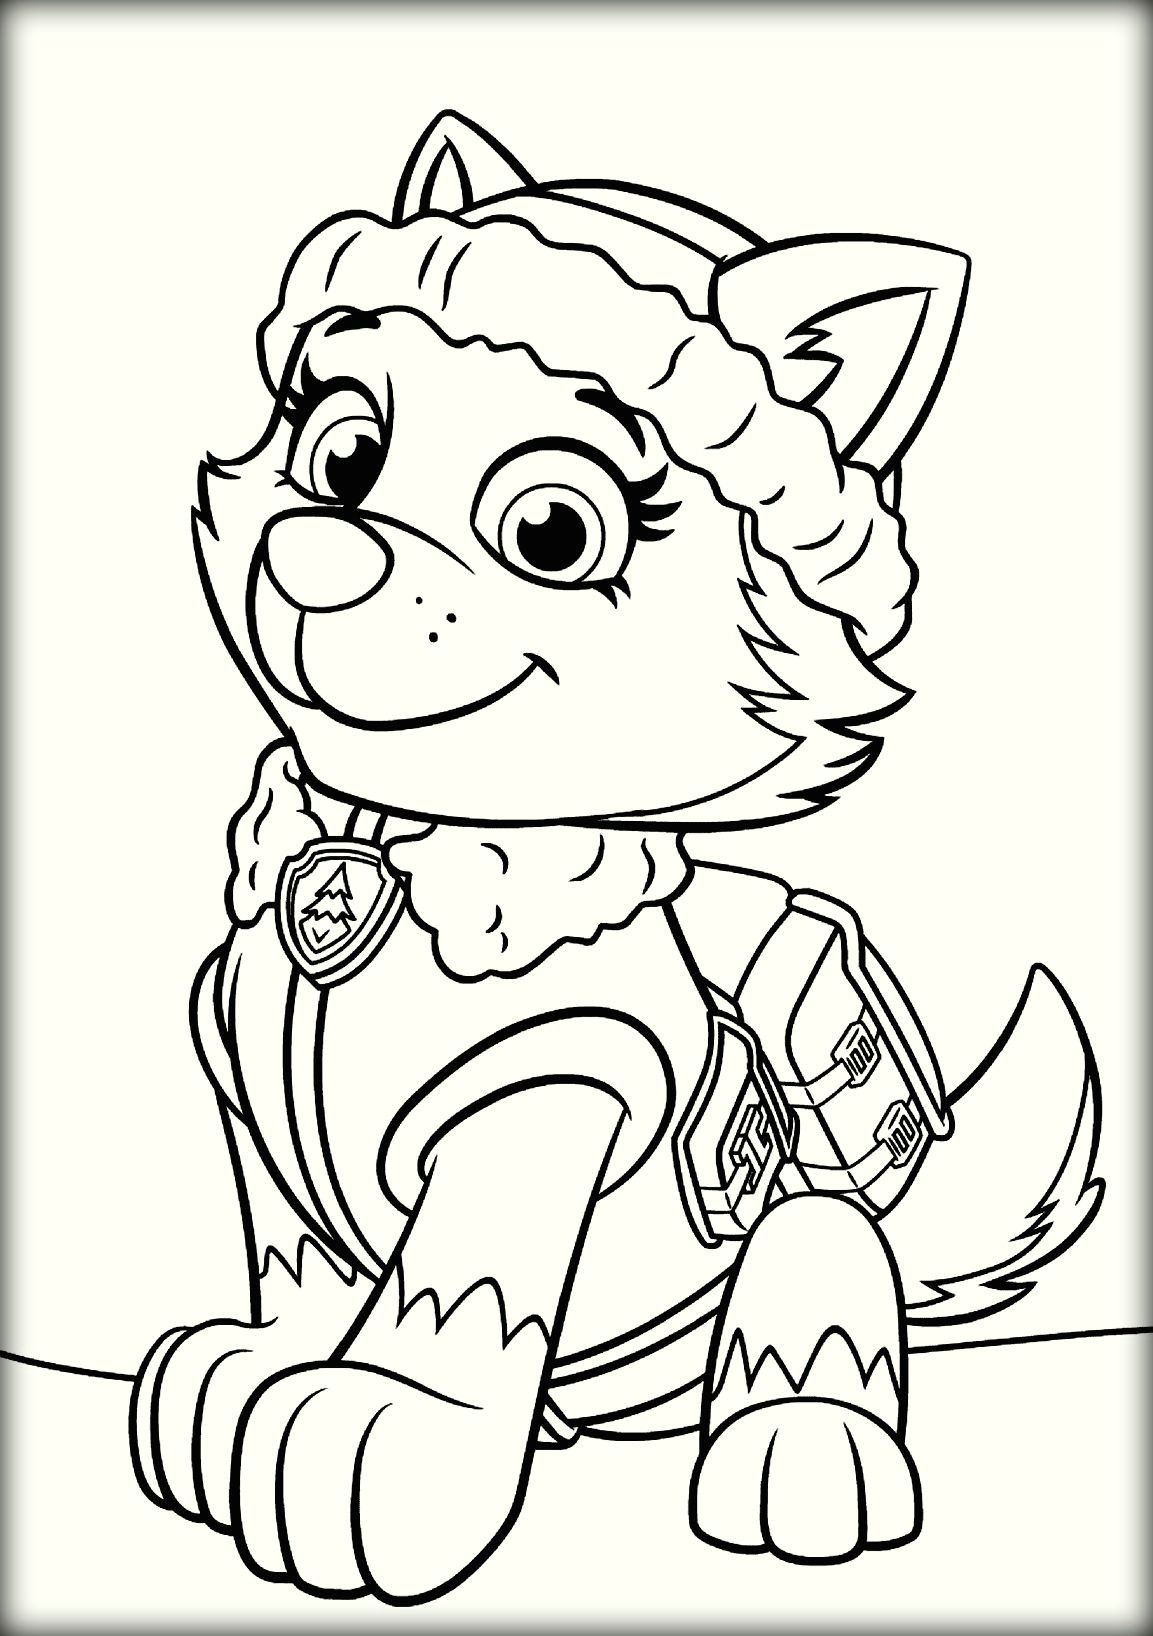 Chase Paw Patrol Easy Drawing Paw Patrol Everest Coloring Pages Paw Patrol Coloring